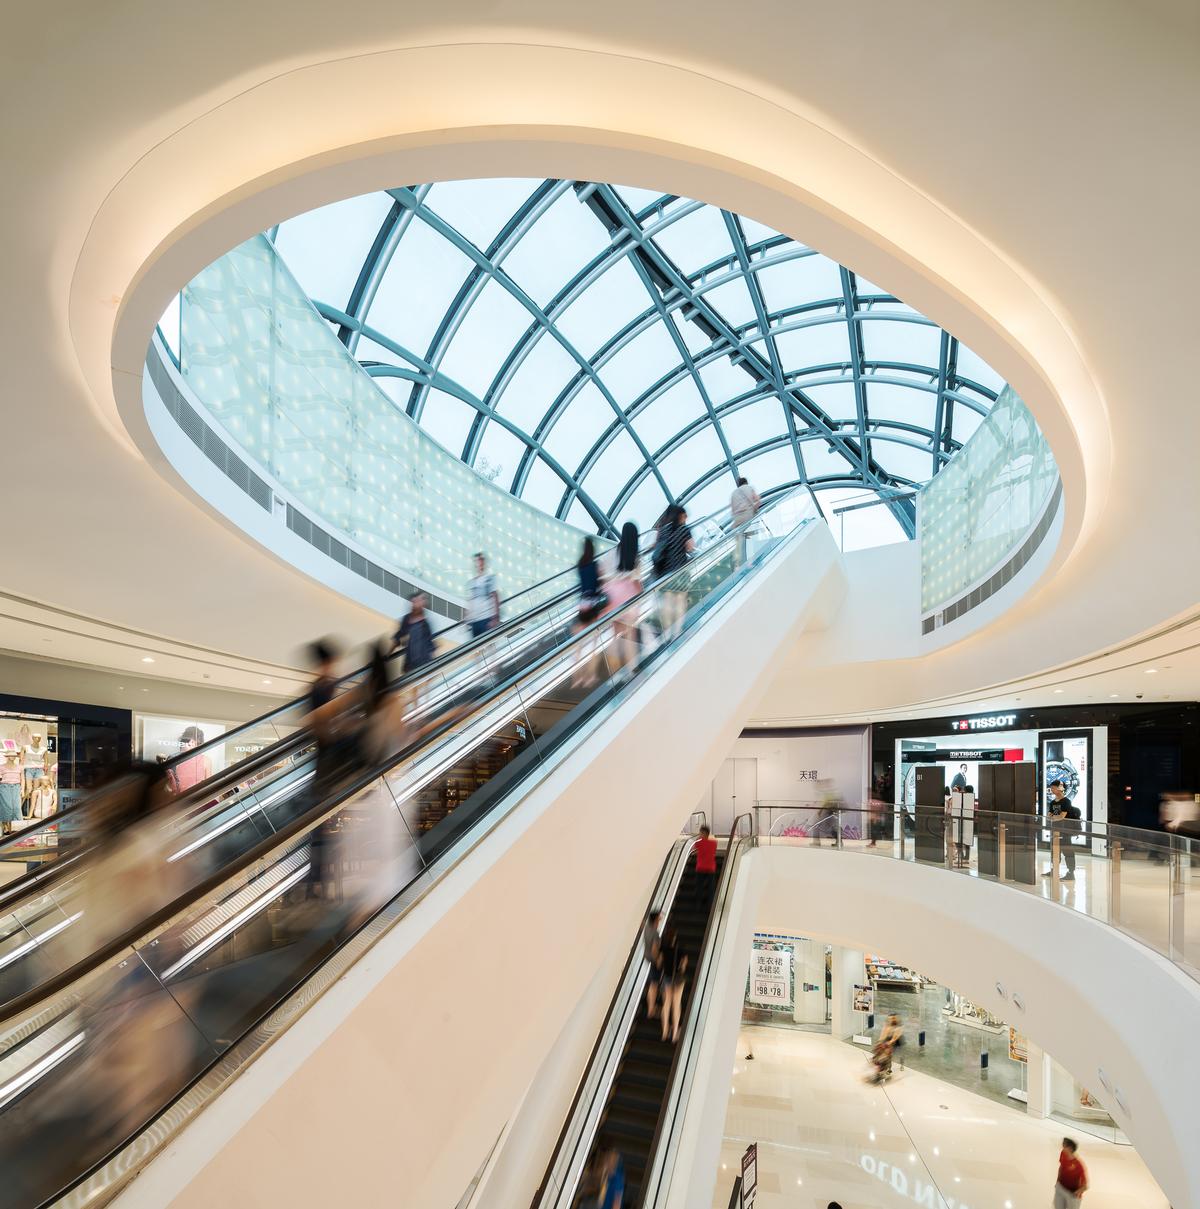 Curving walls and ceilings lead visitors on a journey through the complex / Benoy